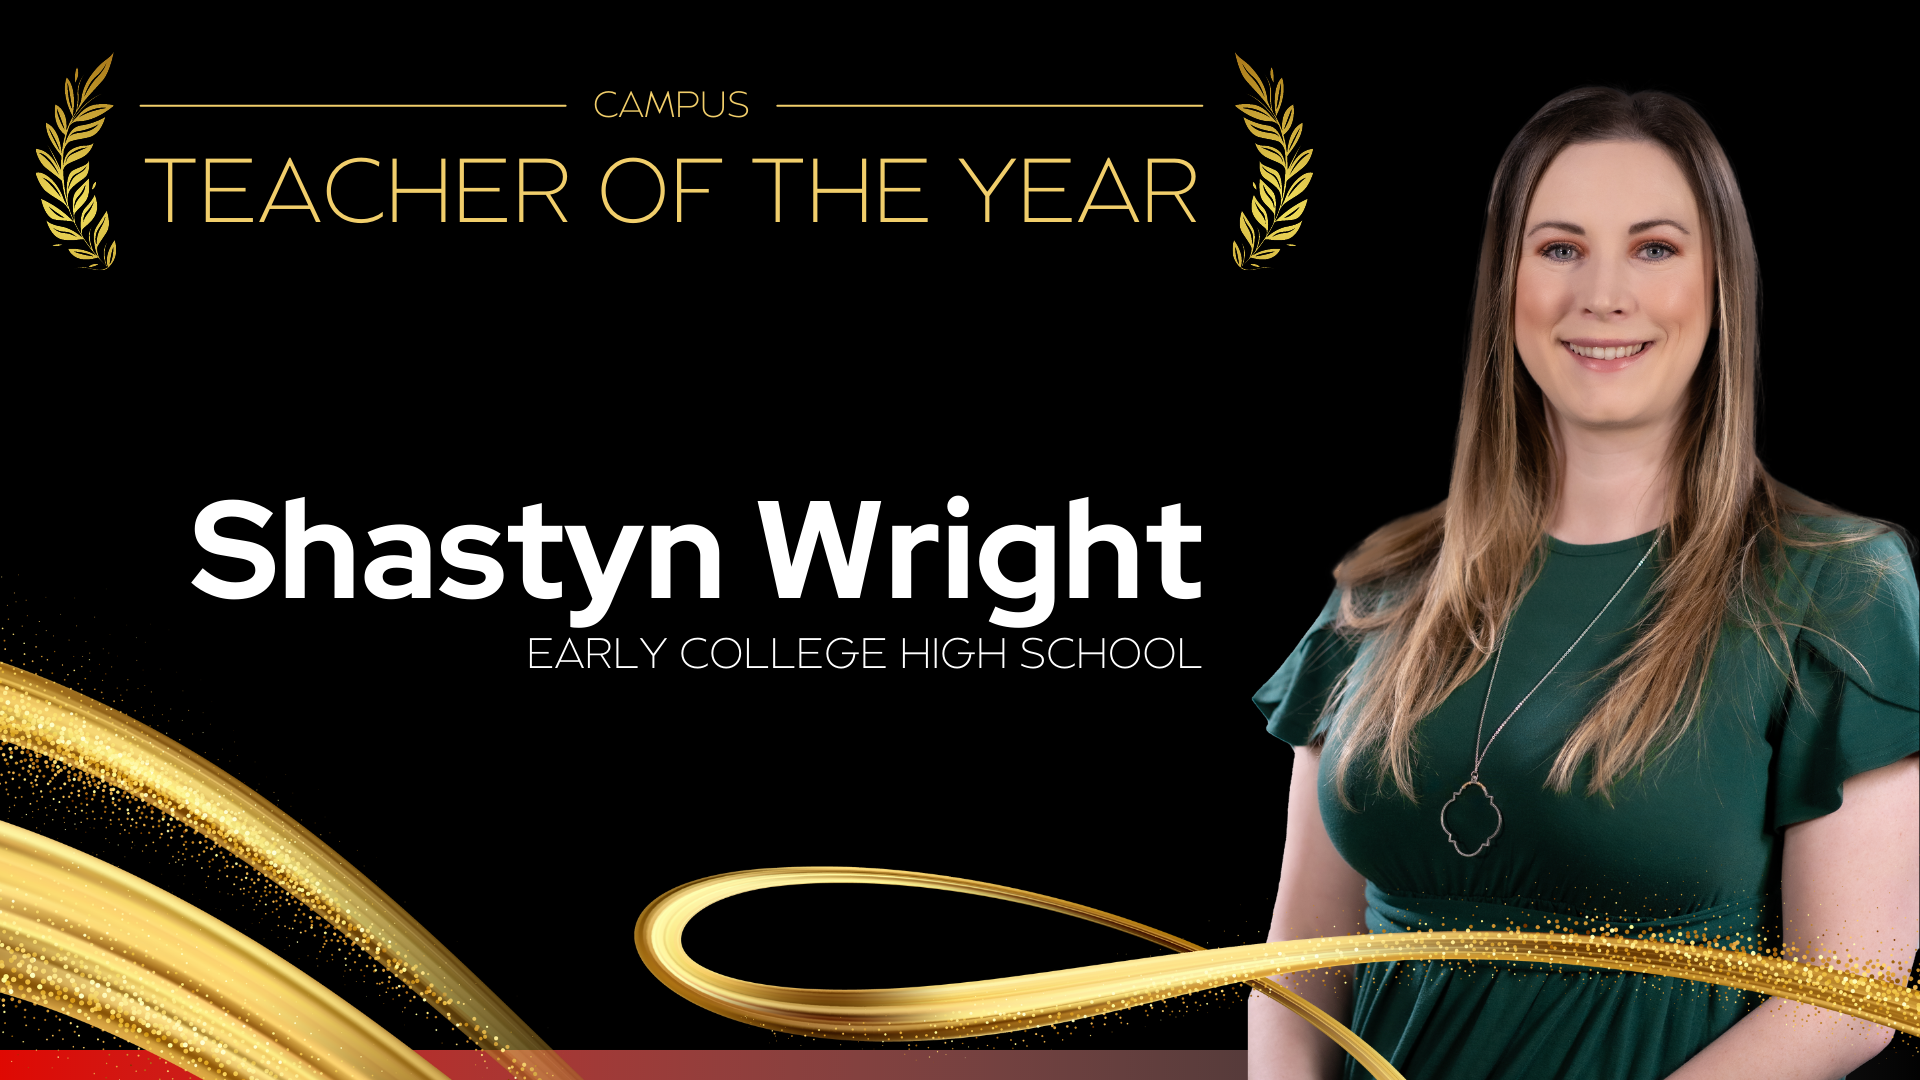 Campus Teacher of the Year Early College High School - Shastyn Wright